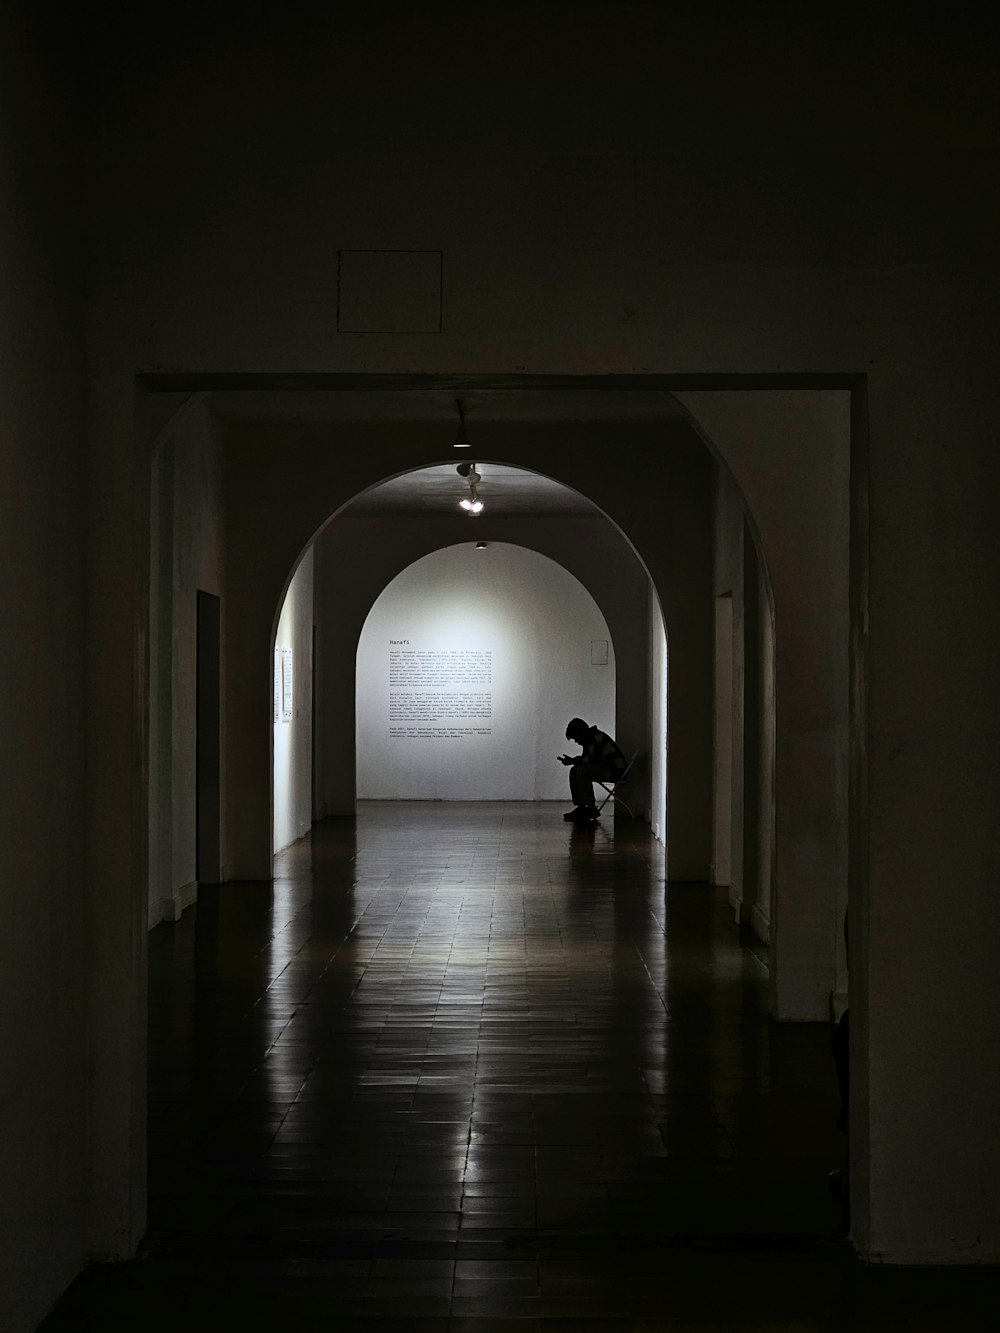 a person sitting on a bench in a dark tunnel